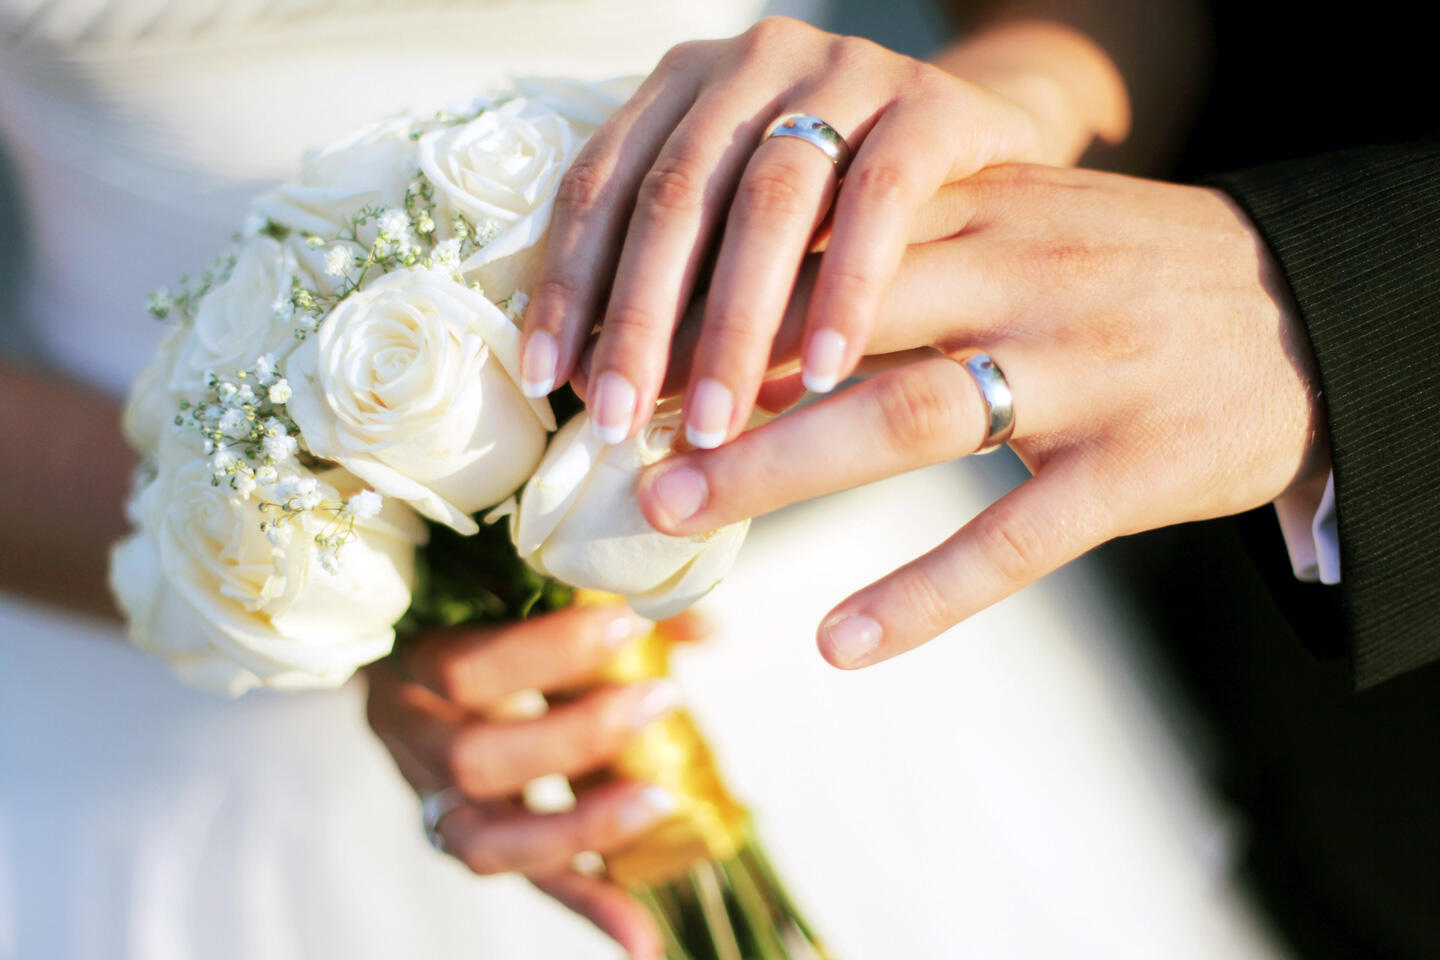 Hands of a married couple with their wedding rings, the bride holding a bouquet of white roses, at the Paris Wedding Fair